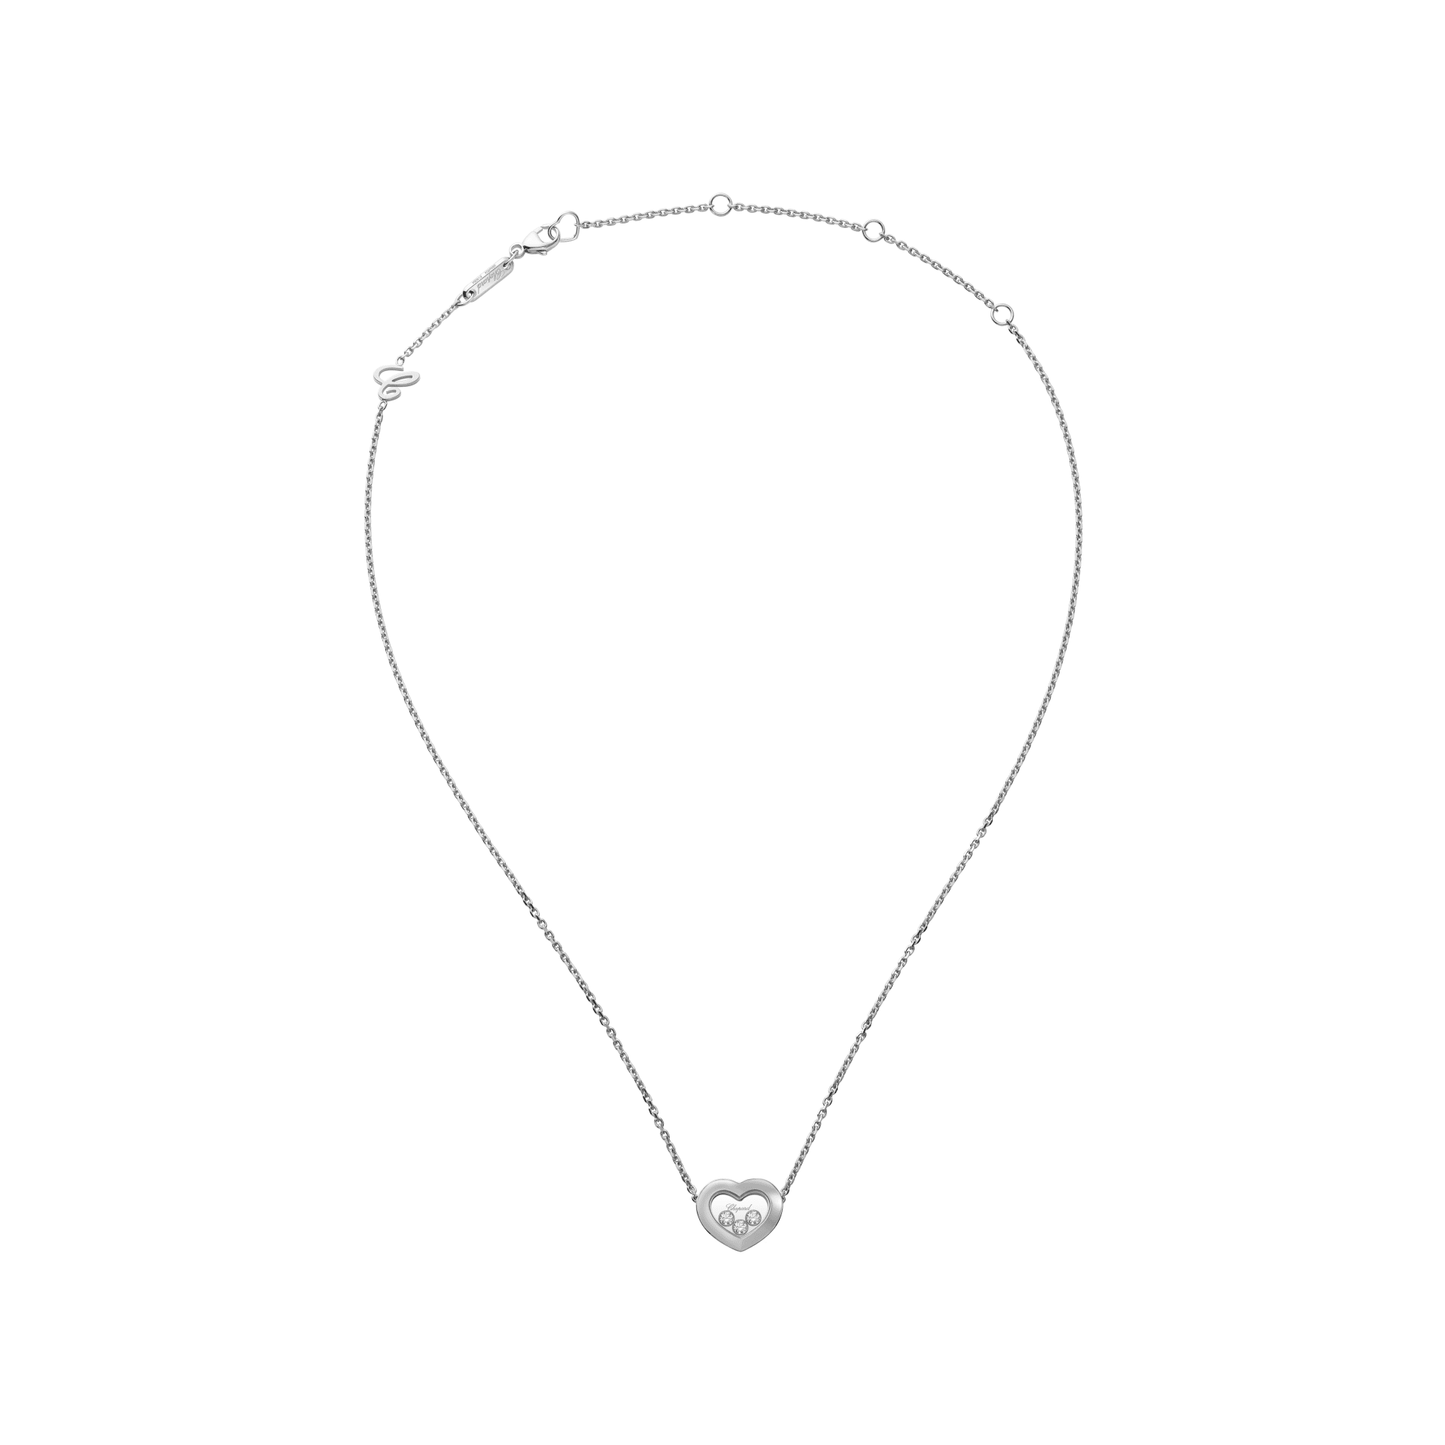 HAPPY DIAMONDS ICONS NECKLACE, ETHICAL WHITE GOLD, DIAMONDS 81A611-1001